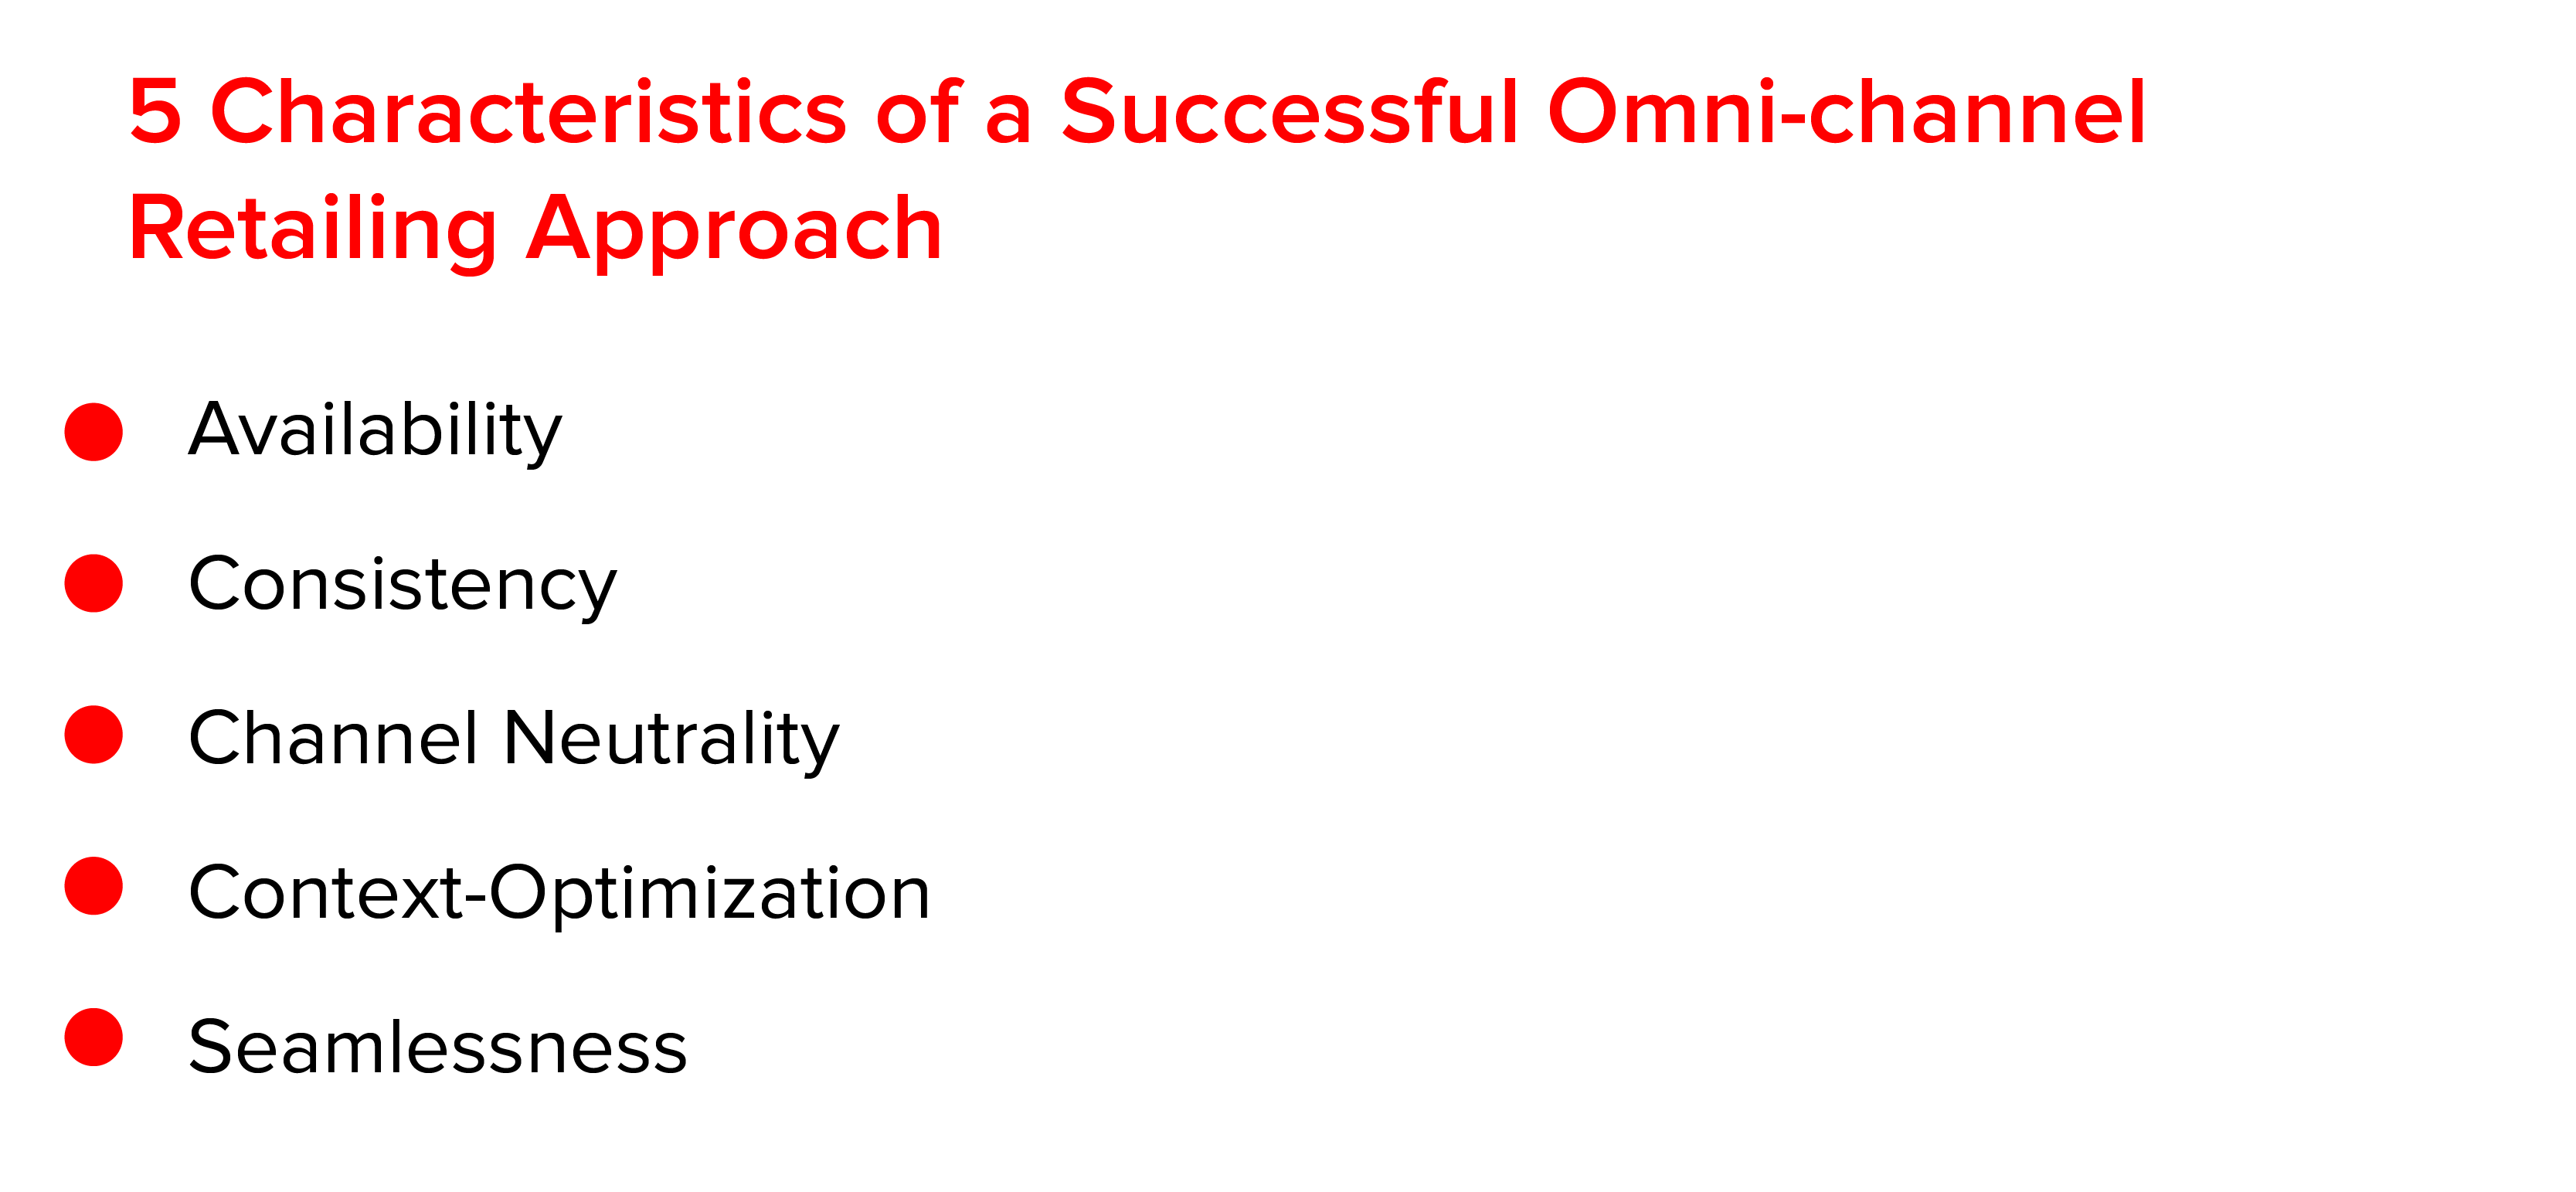 5 Characteristics of a Successful Omni-Channel Retailing Approach